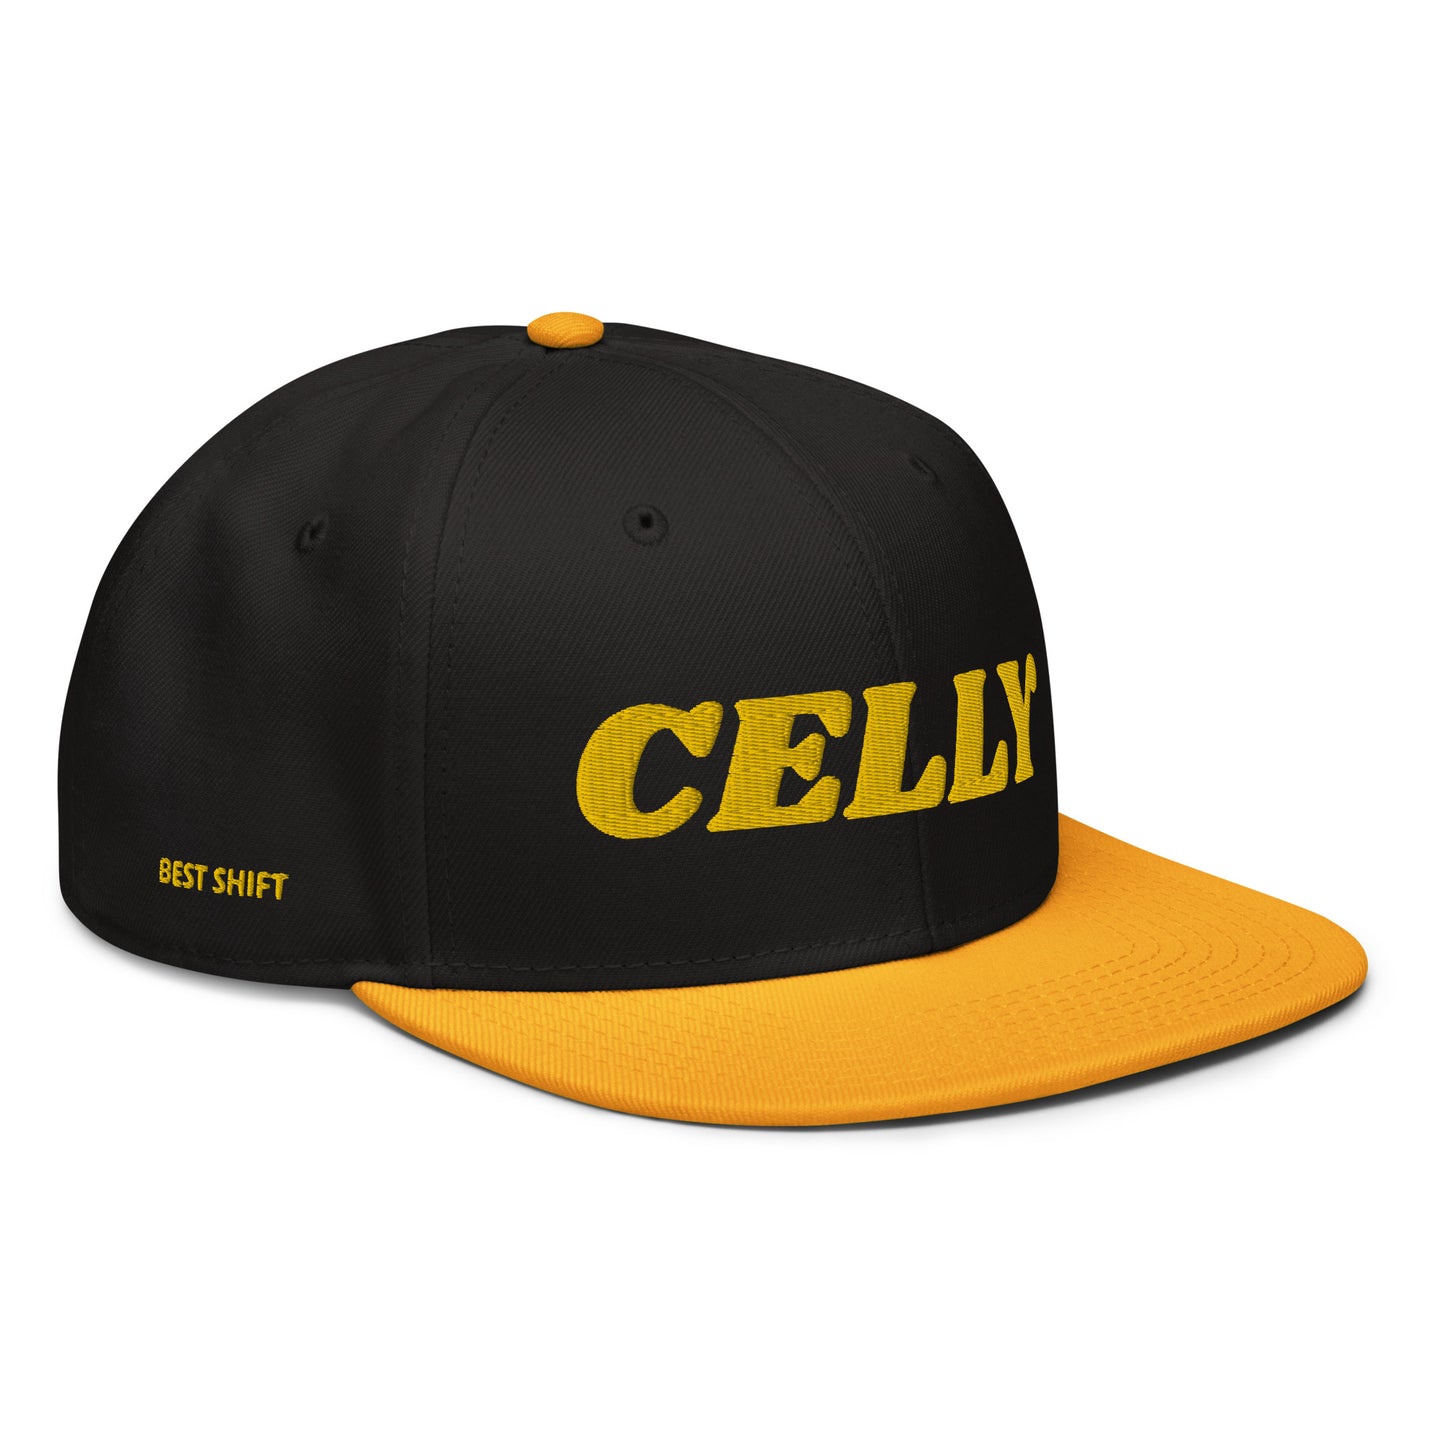 Celly "Gold" Snapback